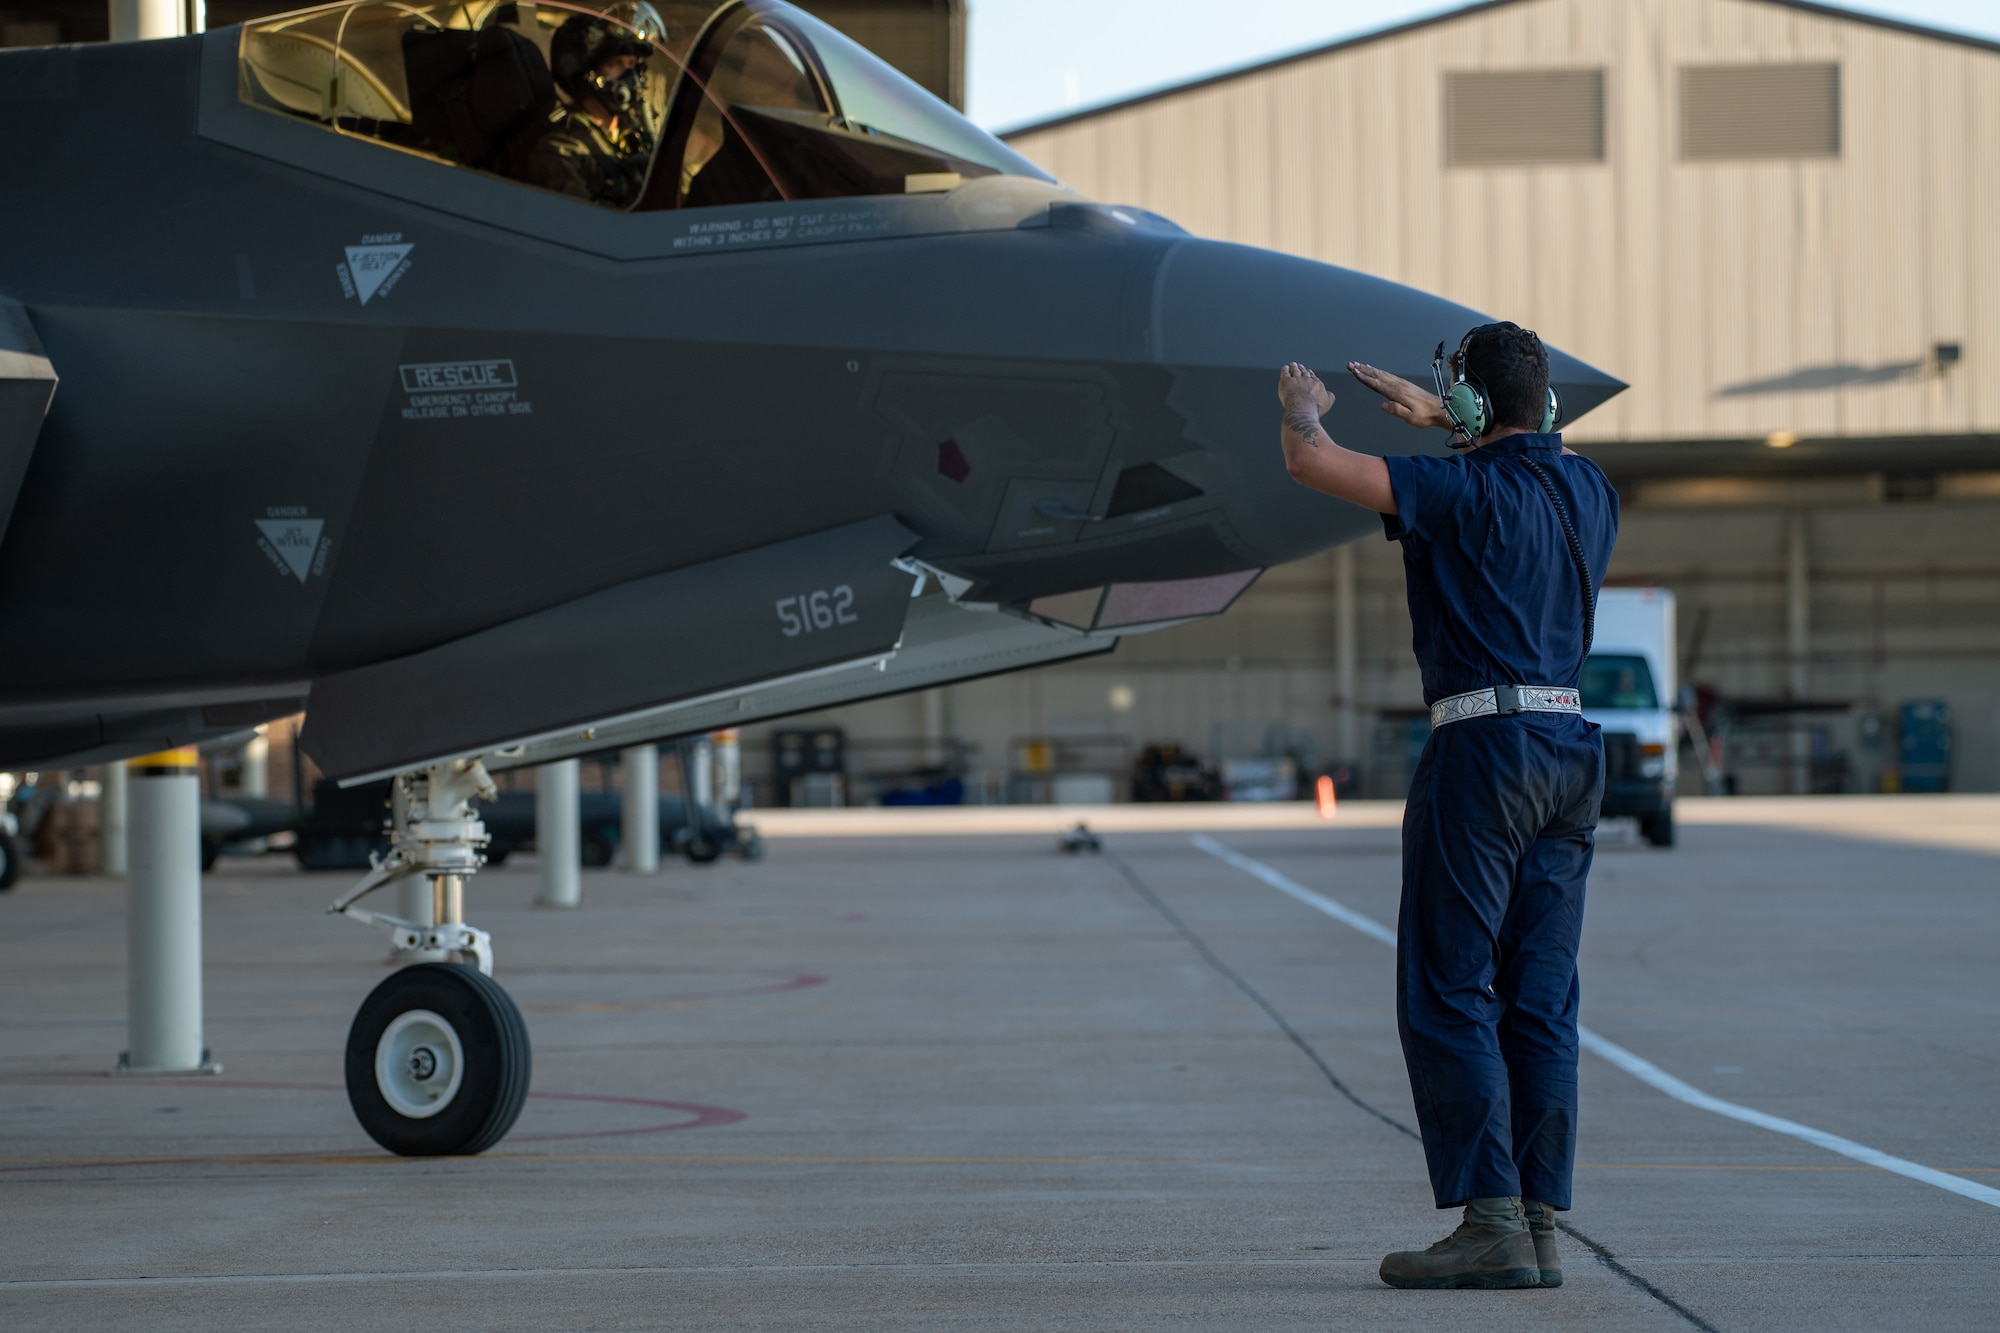 A crew chief with the 388th Fighter Wing marshals an F-35A prior to take off from Hill Air Force Base, Utah, the evening of Aug. 20, 2019, as the active duty 388th and reserve 419th Fighter Wings conducted local night flying operations. The wings are required to train at night to maintain their readiness and all-weather capabilities. Increased flying also provides a valuable opportunity to evaluate aircraft maintenance resiliency and operational agility. (U.S. Air Force photo by R. Nial Bradshaw)